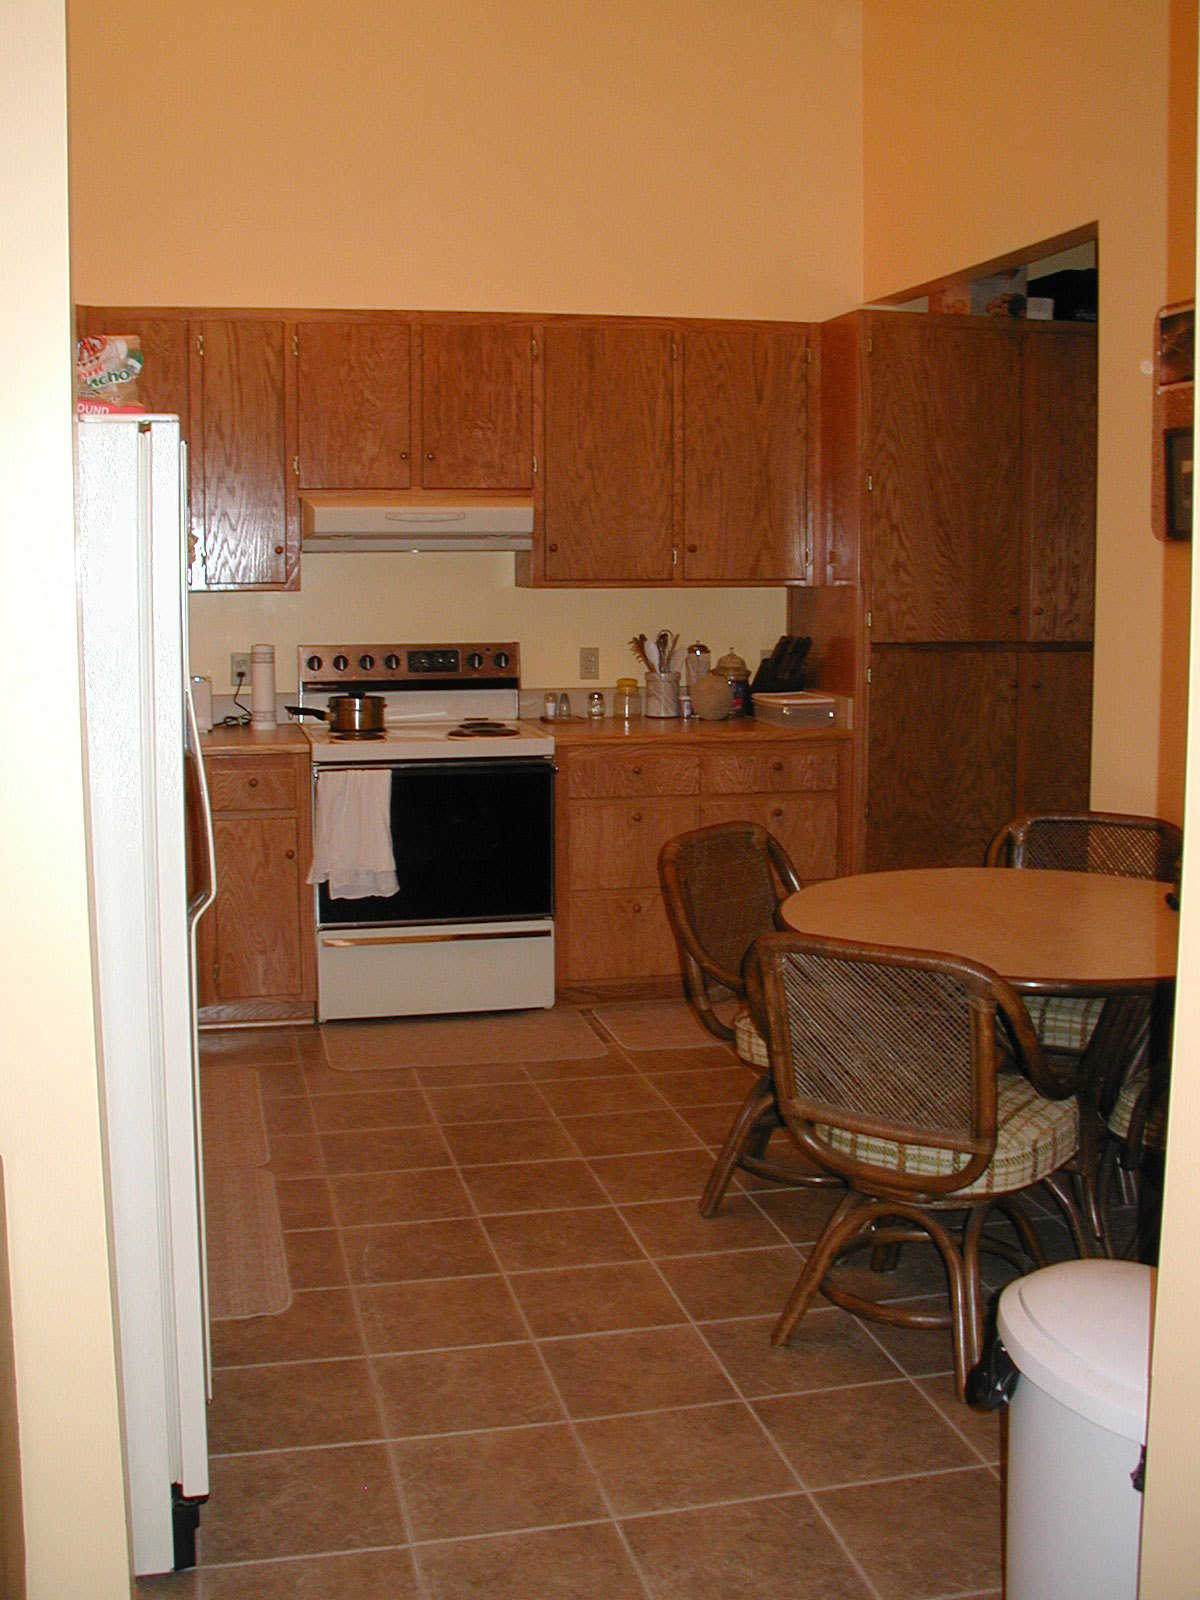 Kitchen — Theresa O’Dell enjoys cooking in her easily maintained, efficiently arranged kitchen.